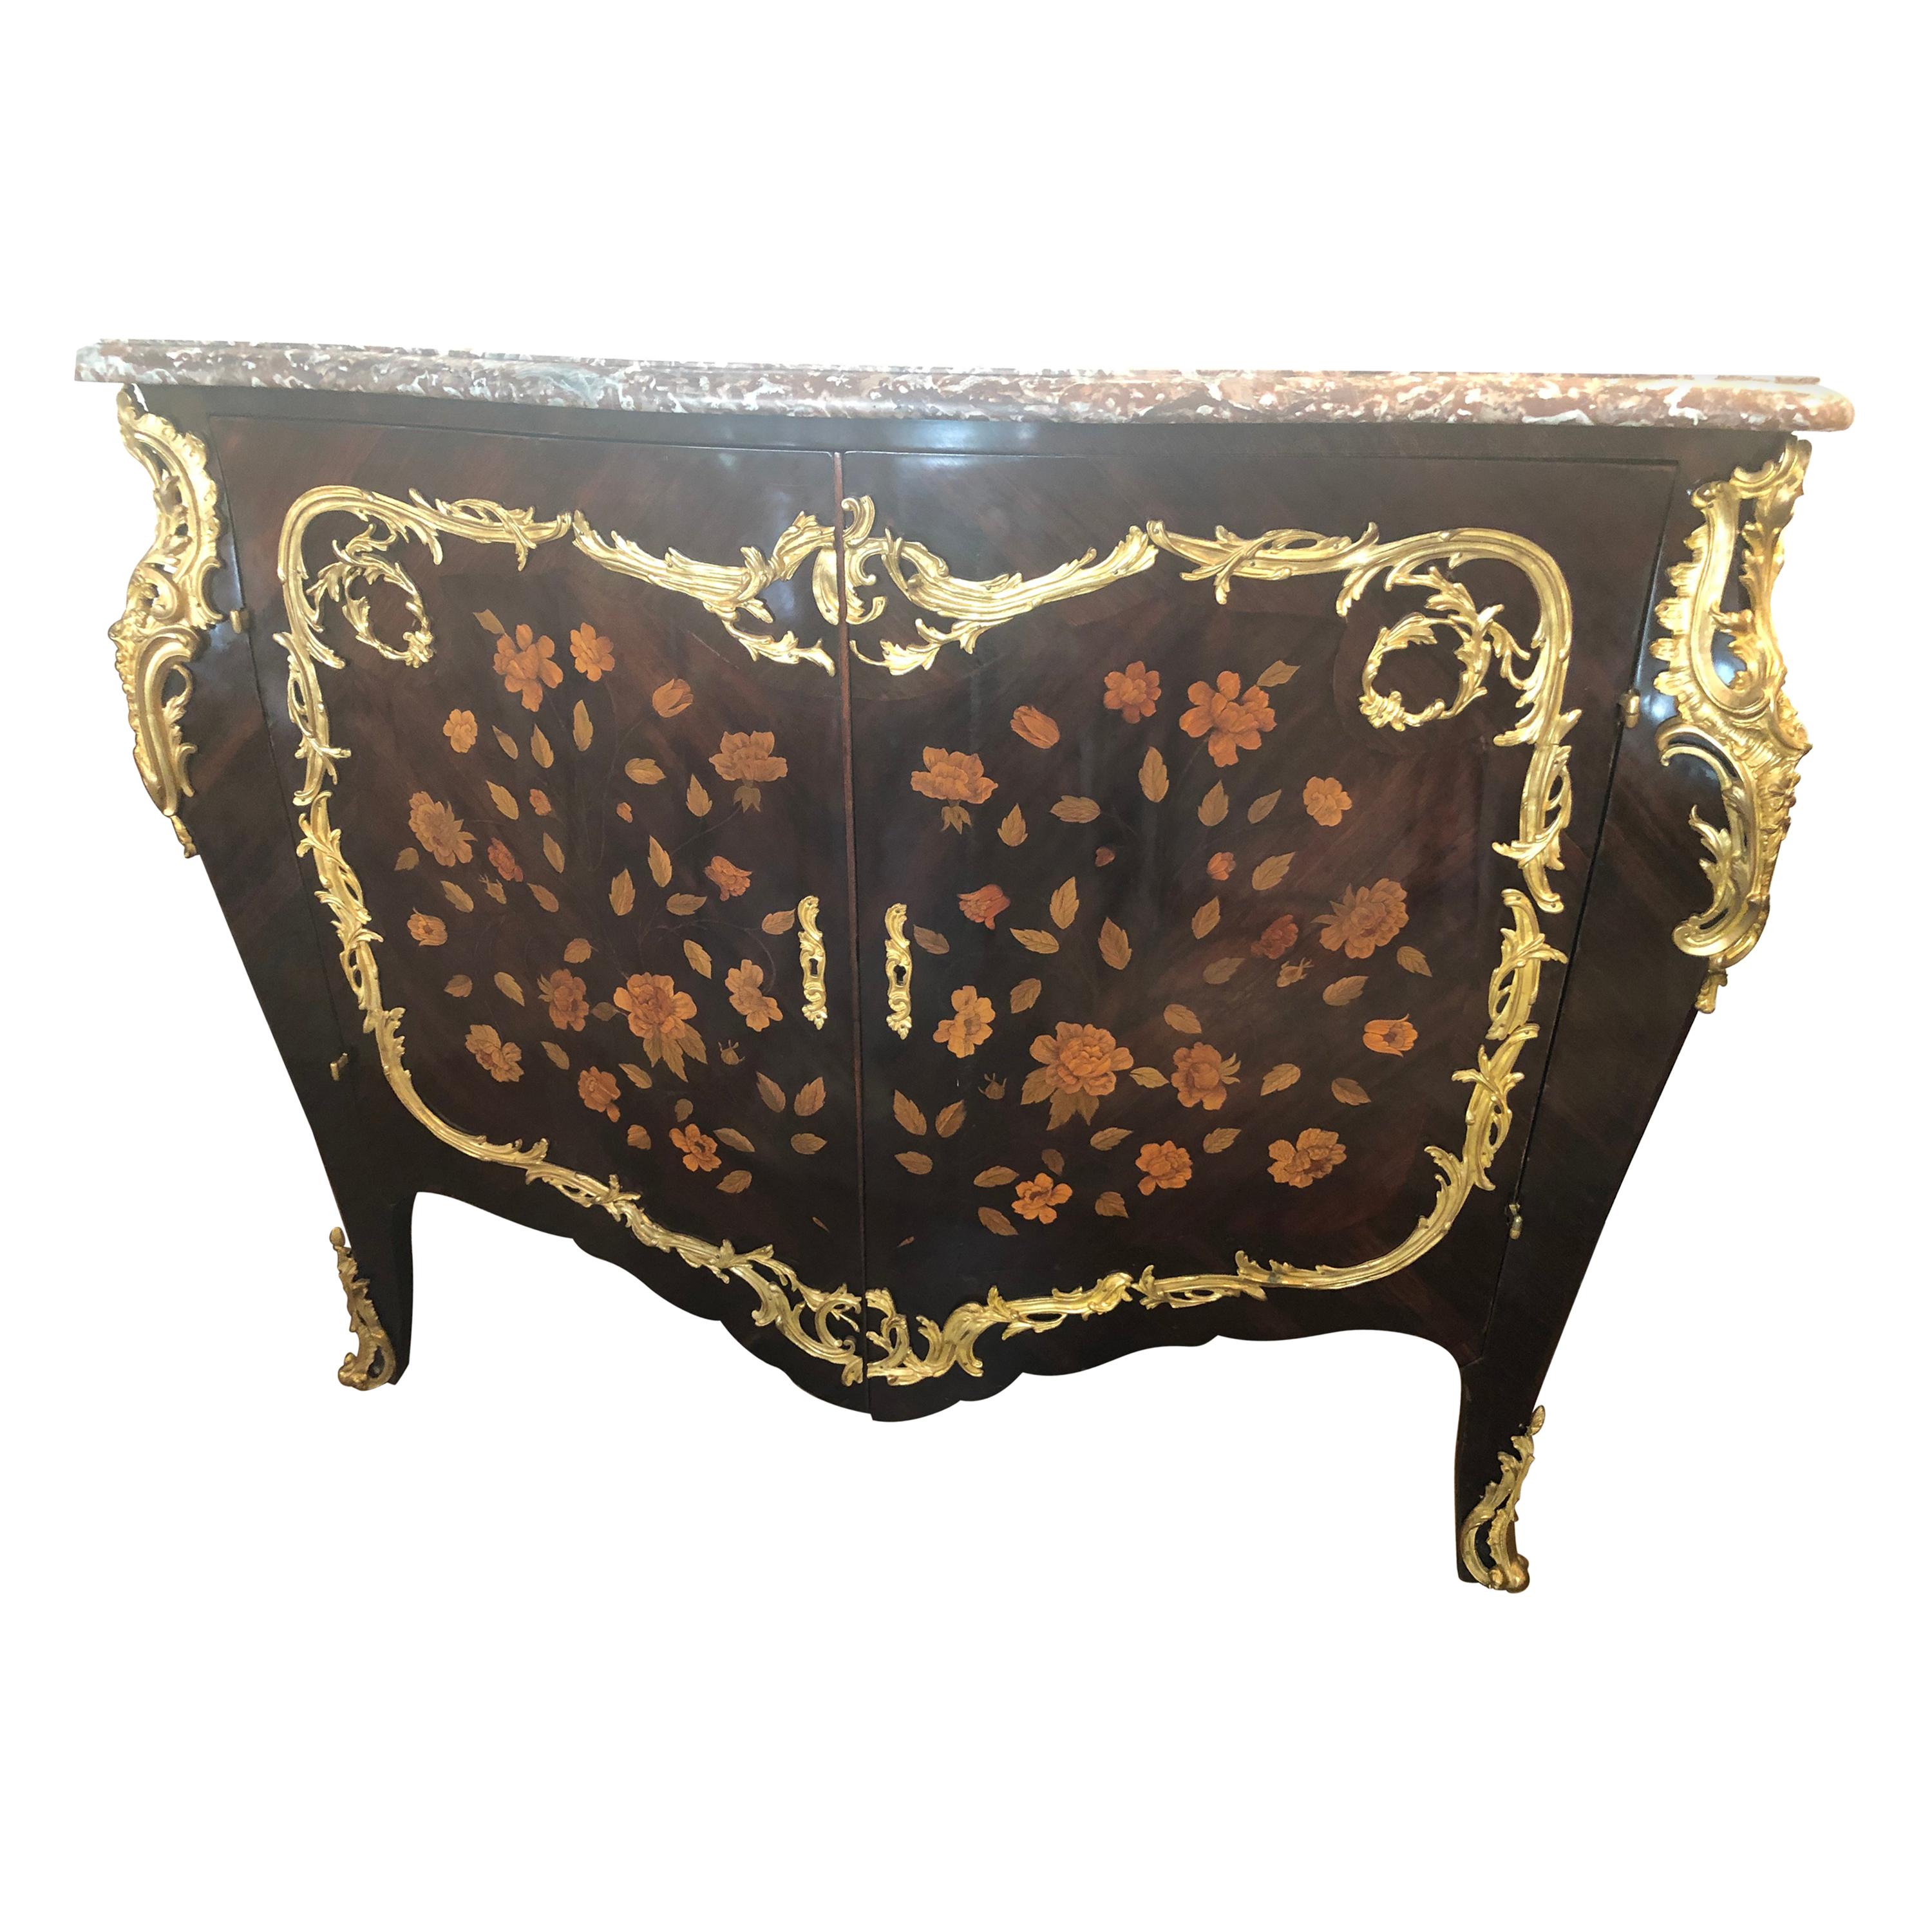 Louis XV Style Ormolu-Mounted Kingwood and Tulipwood Marquetry Cabinet